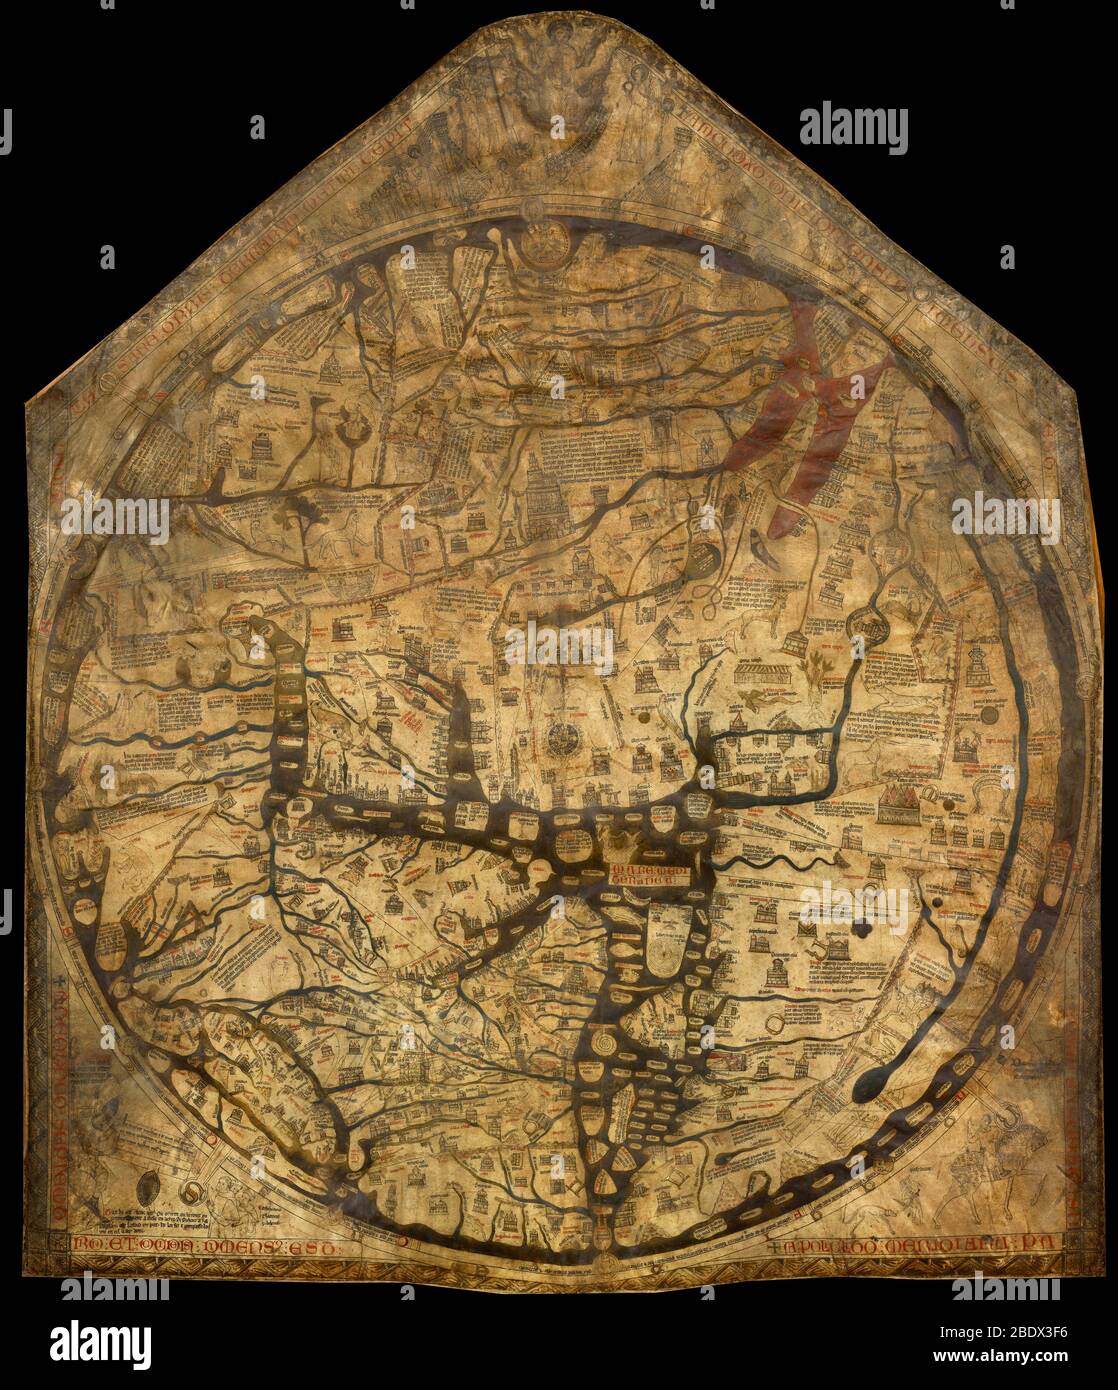 Hereford Mappa Mundi, 1300 Banque D'Images